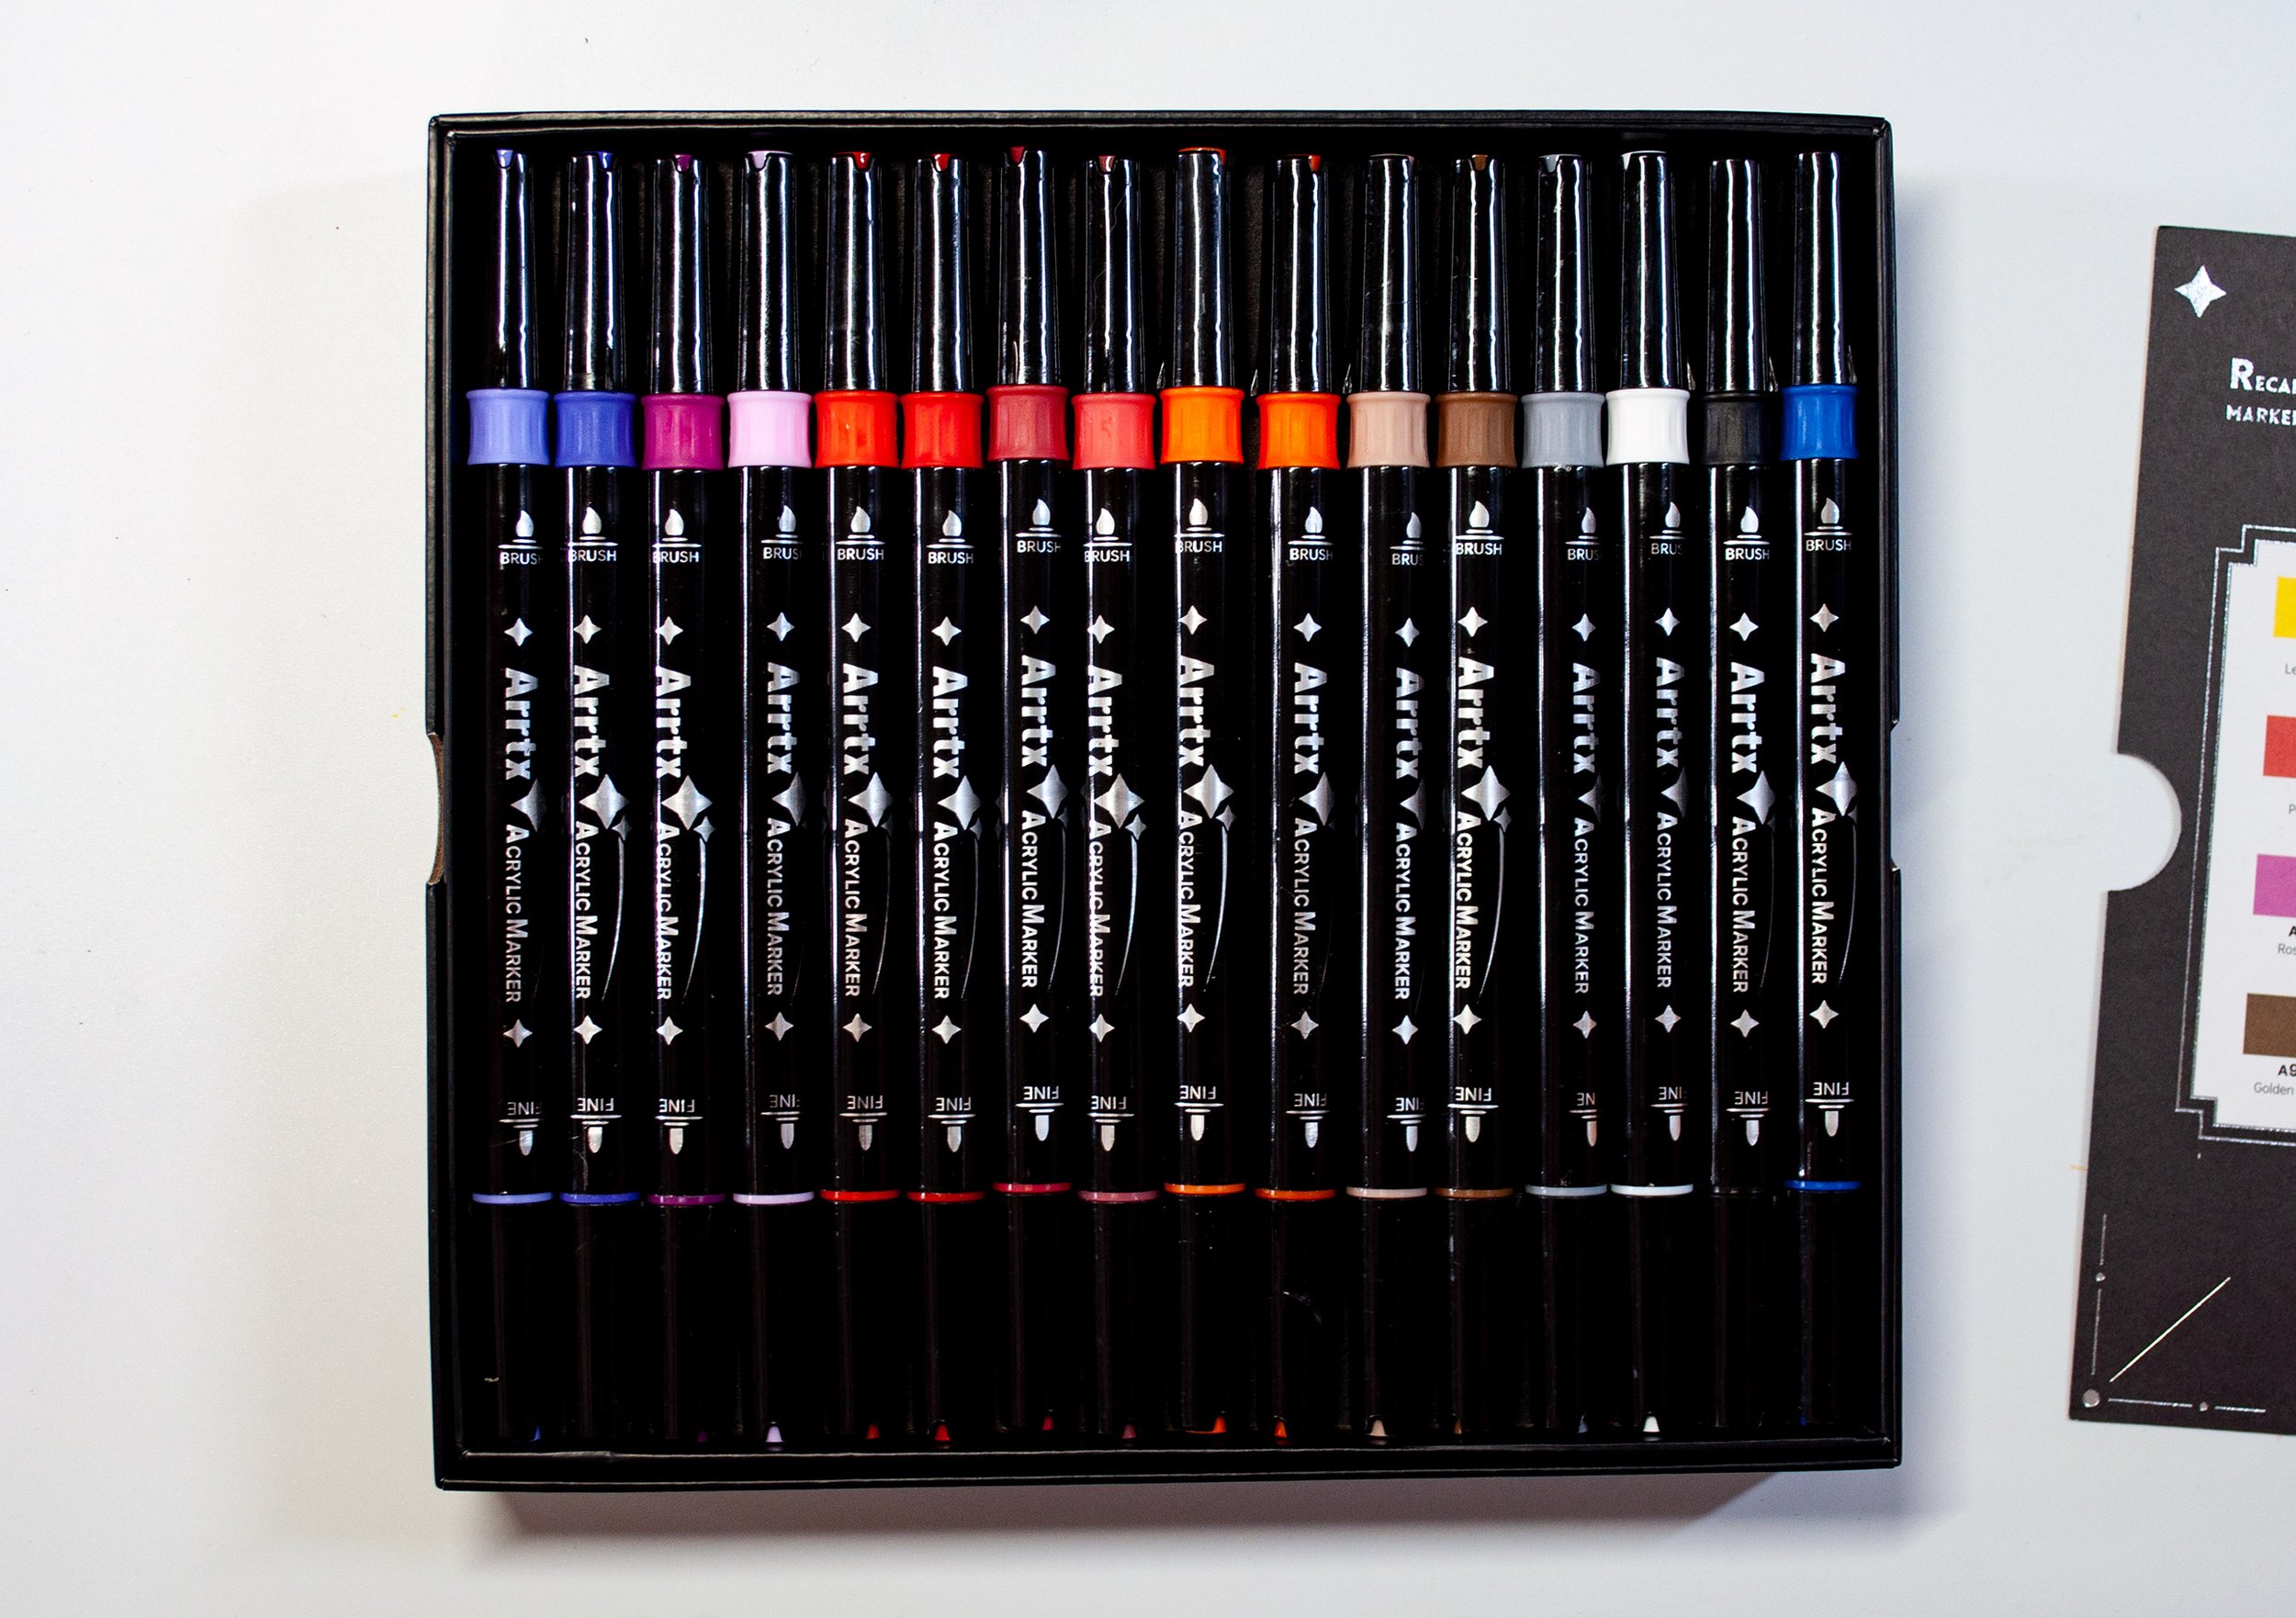 Review Of The Arrtx Acrylic Marker Pens And Metallic Acrylic